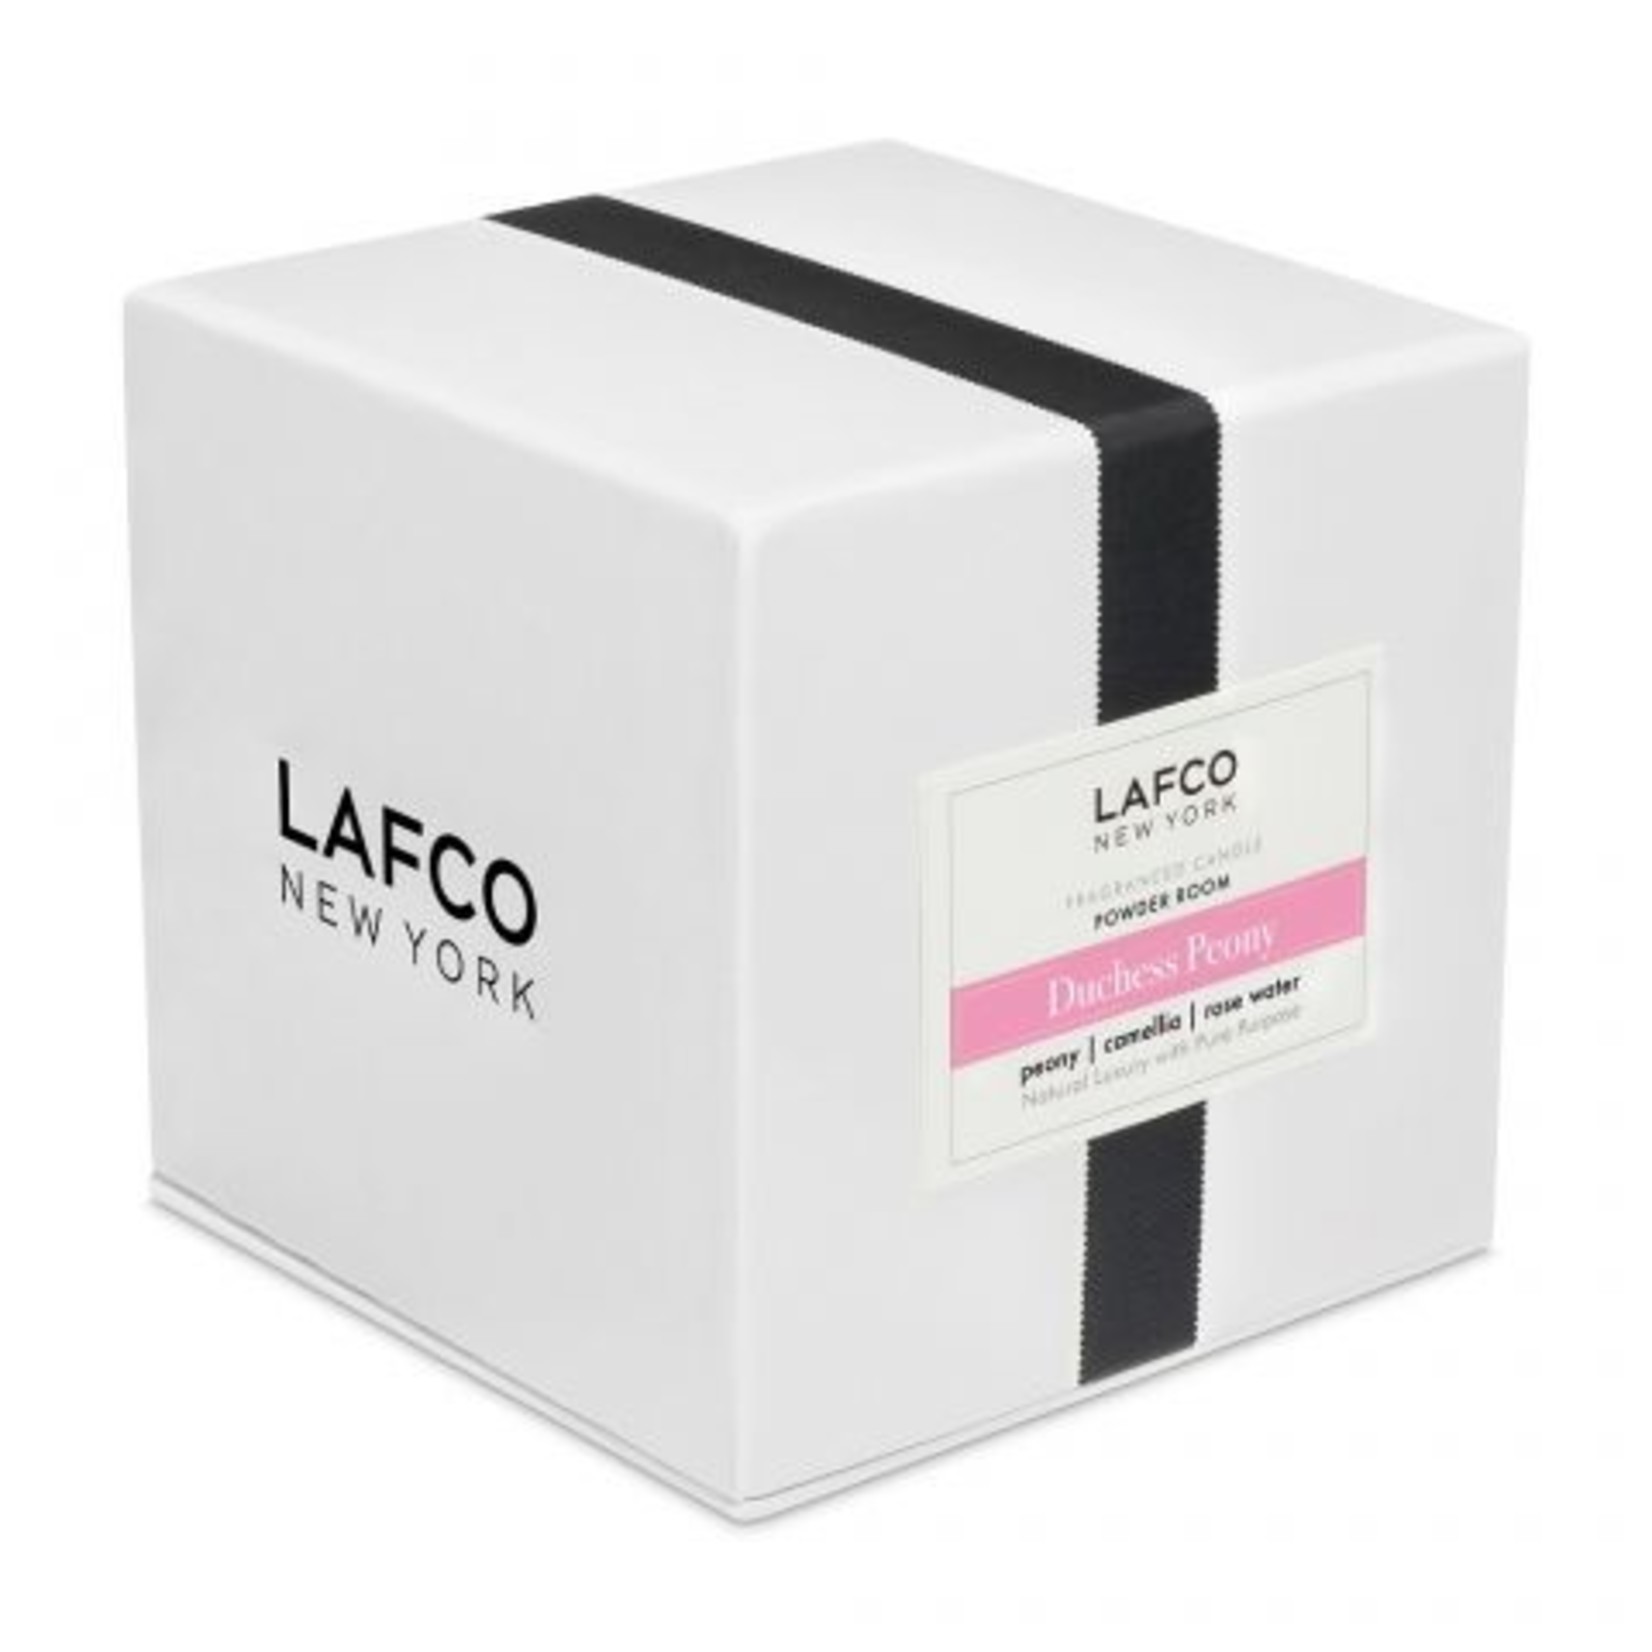 LAFCO LAFCO - 15.5 Oz Candle Duchess Peony - Powder Room